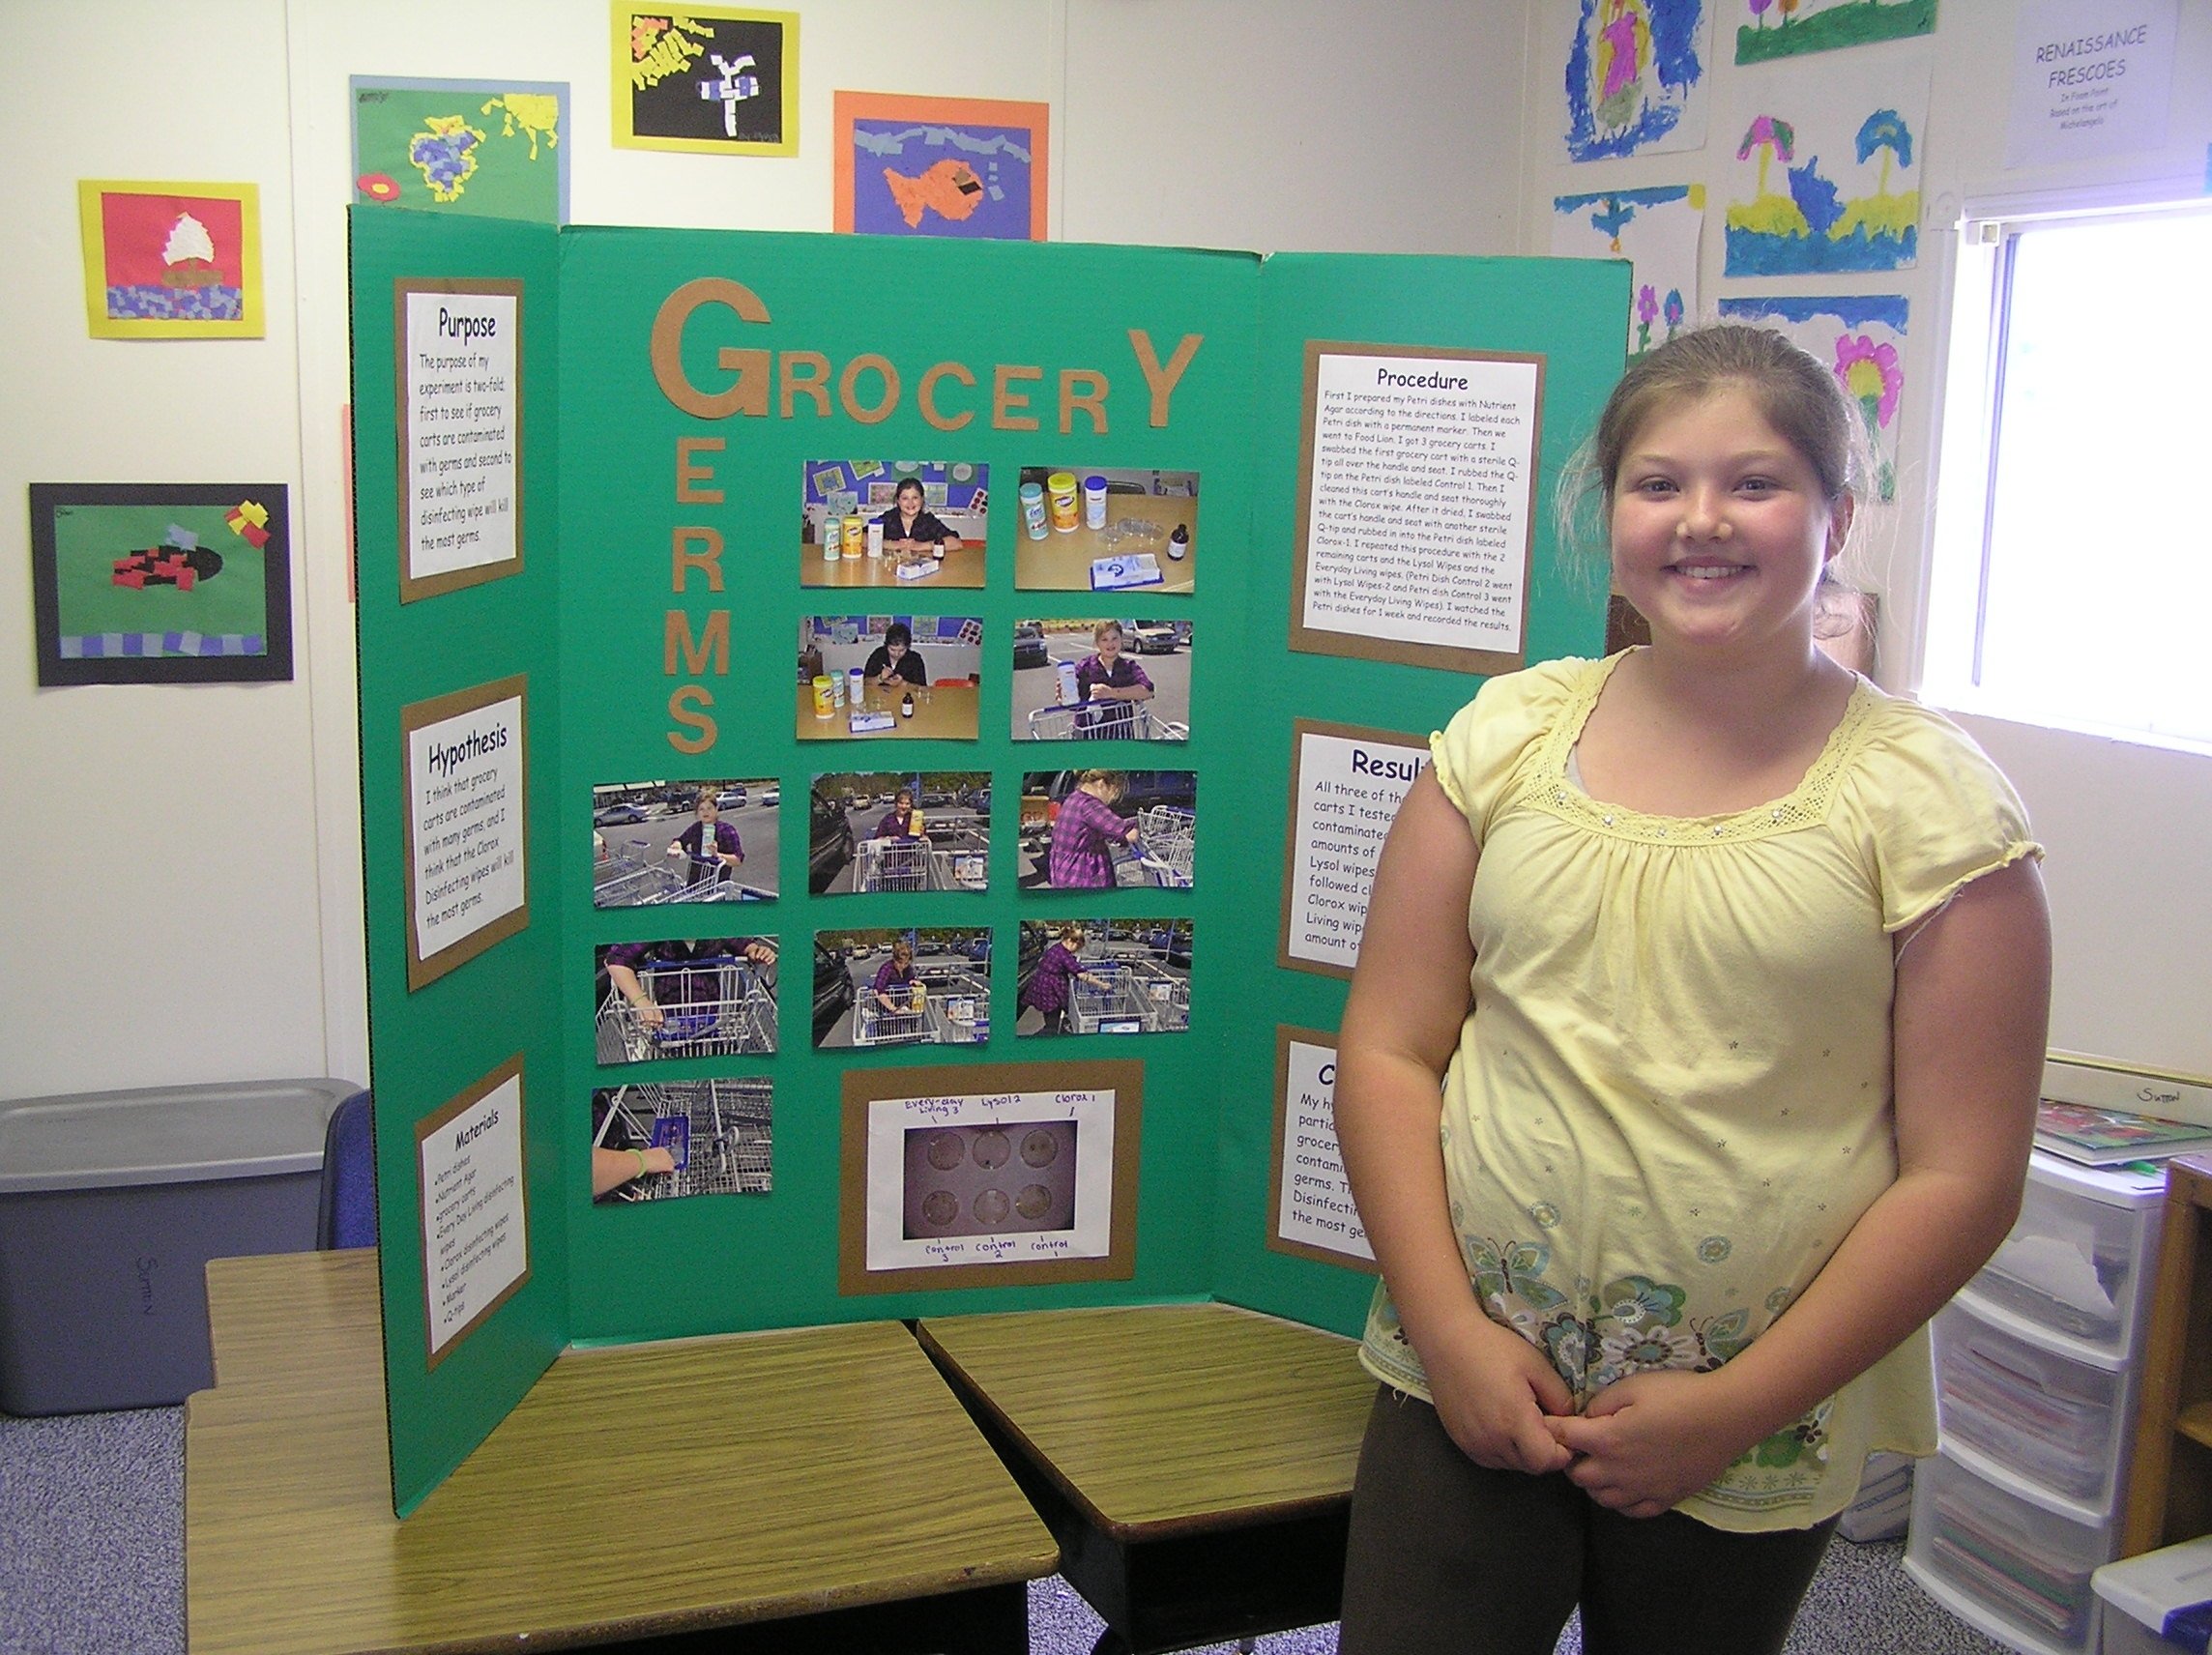 10 Most Popular Science Fair Project Ideas For Kids In 5Th Grade grocery germs whats on that cart handle science fair 12 2022